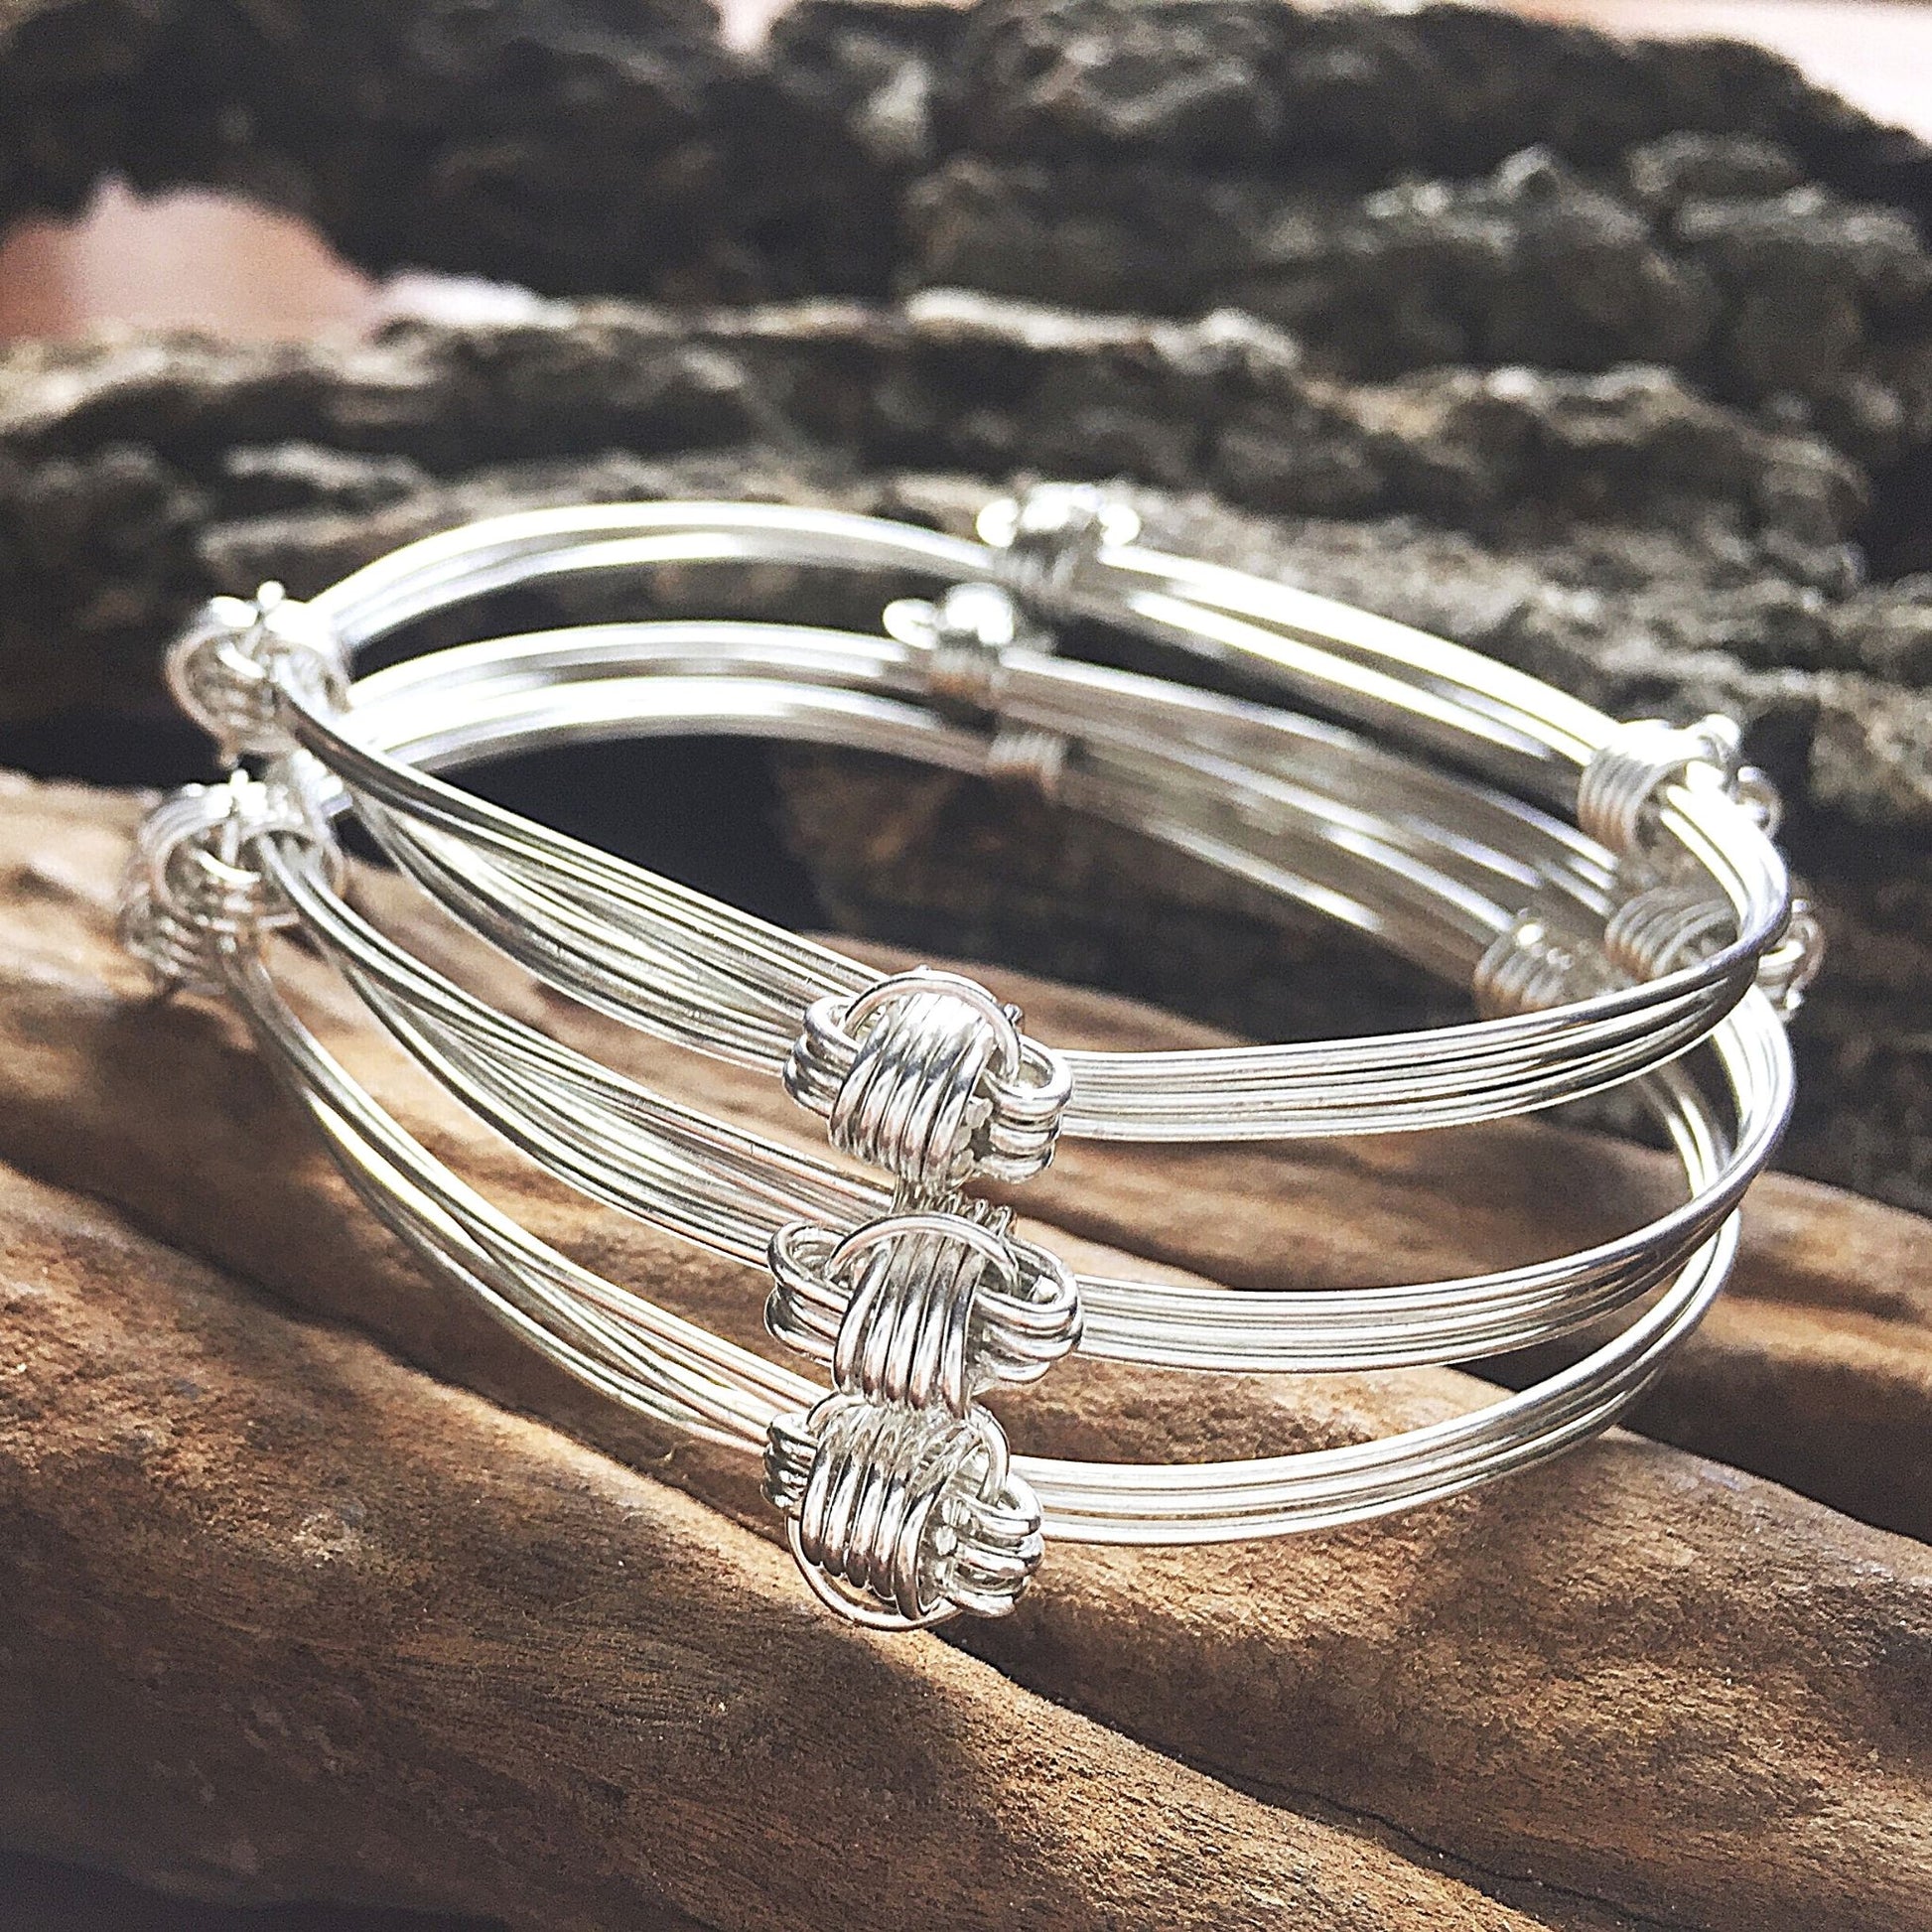 Silver Elephant hair knot bangles made by the Zuri Collection 